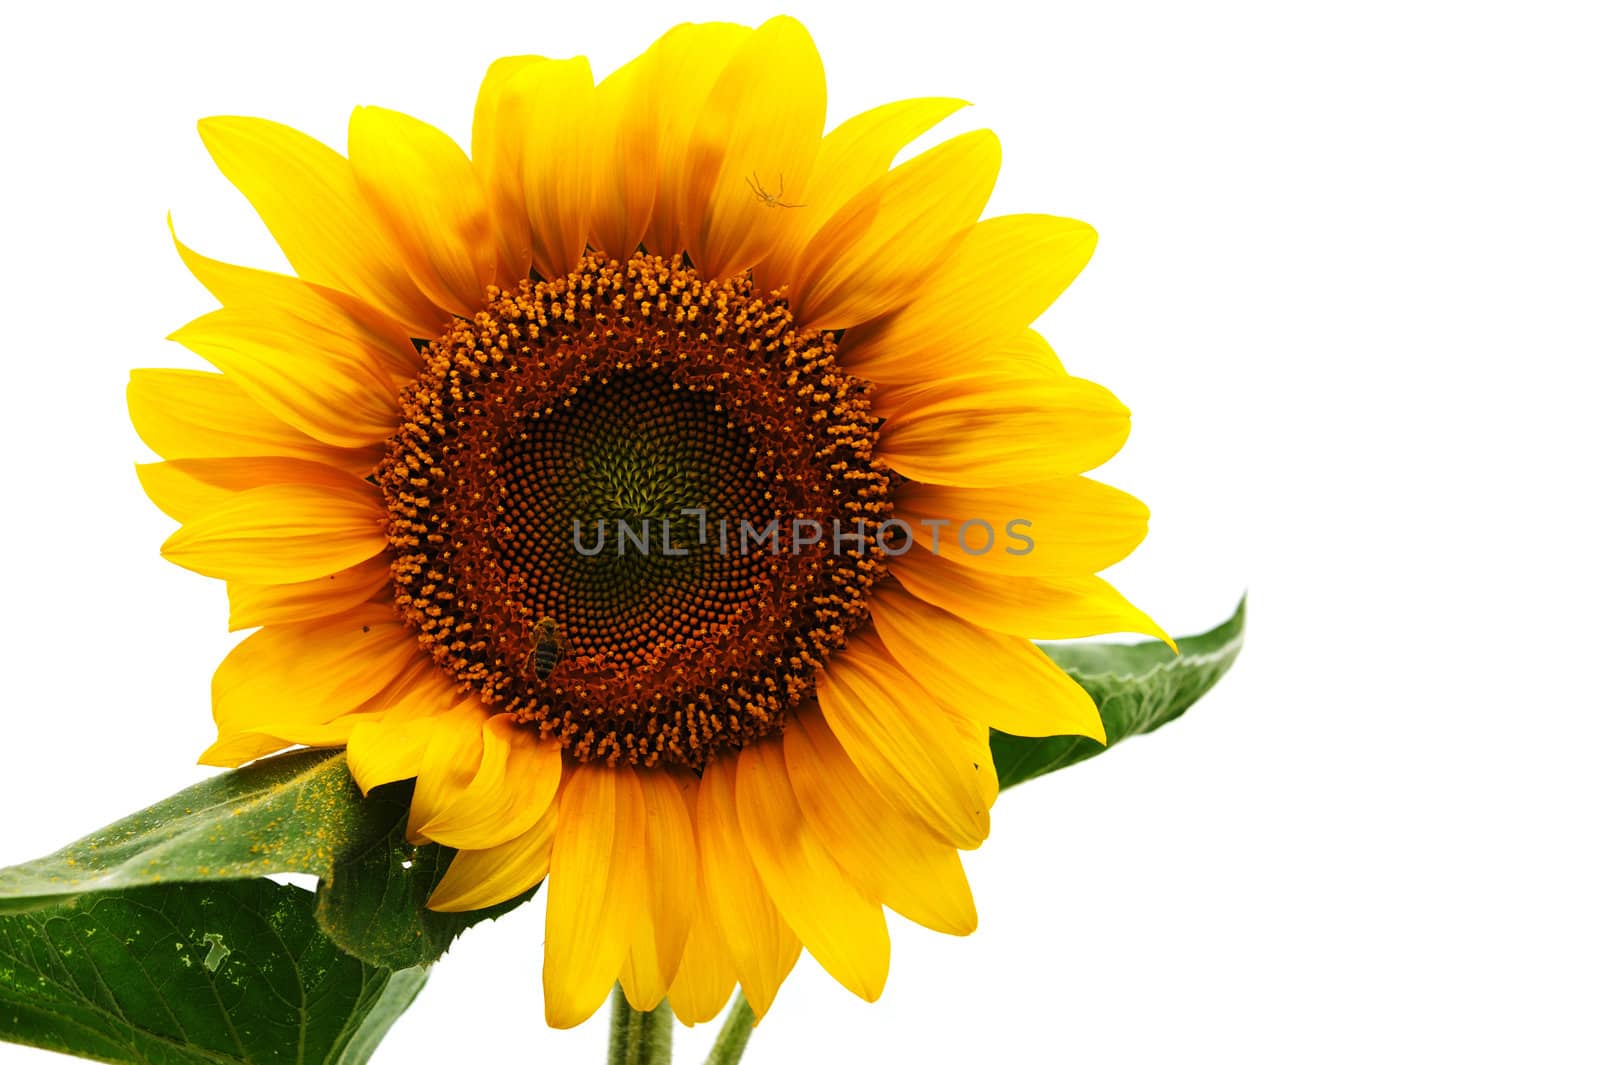 Sunflower against white background by raywoo